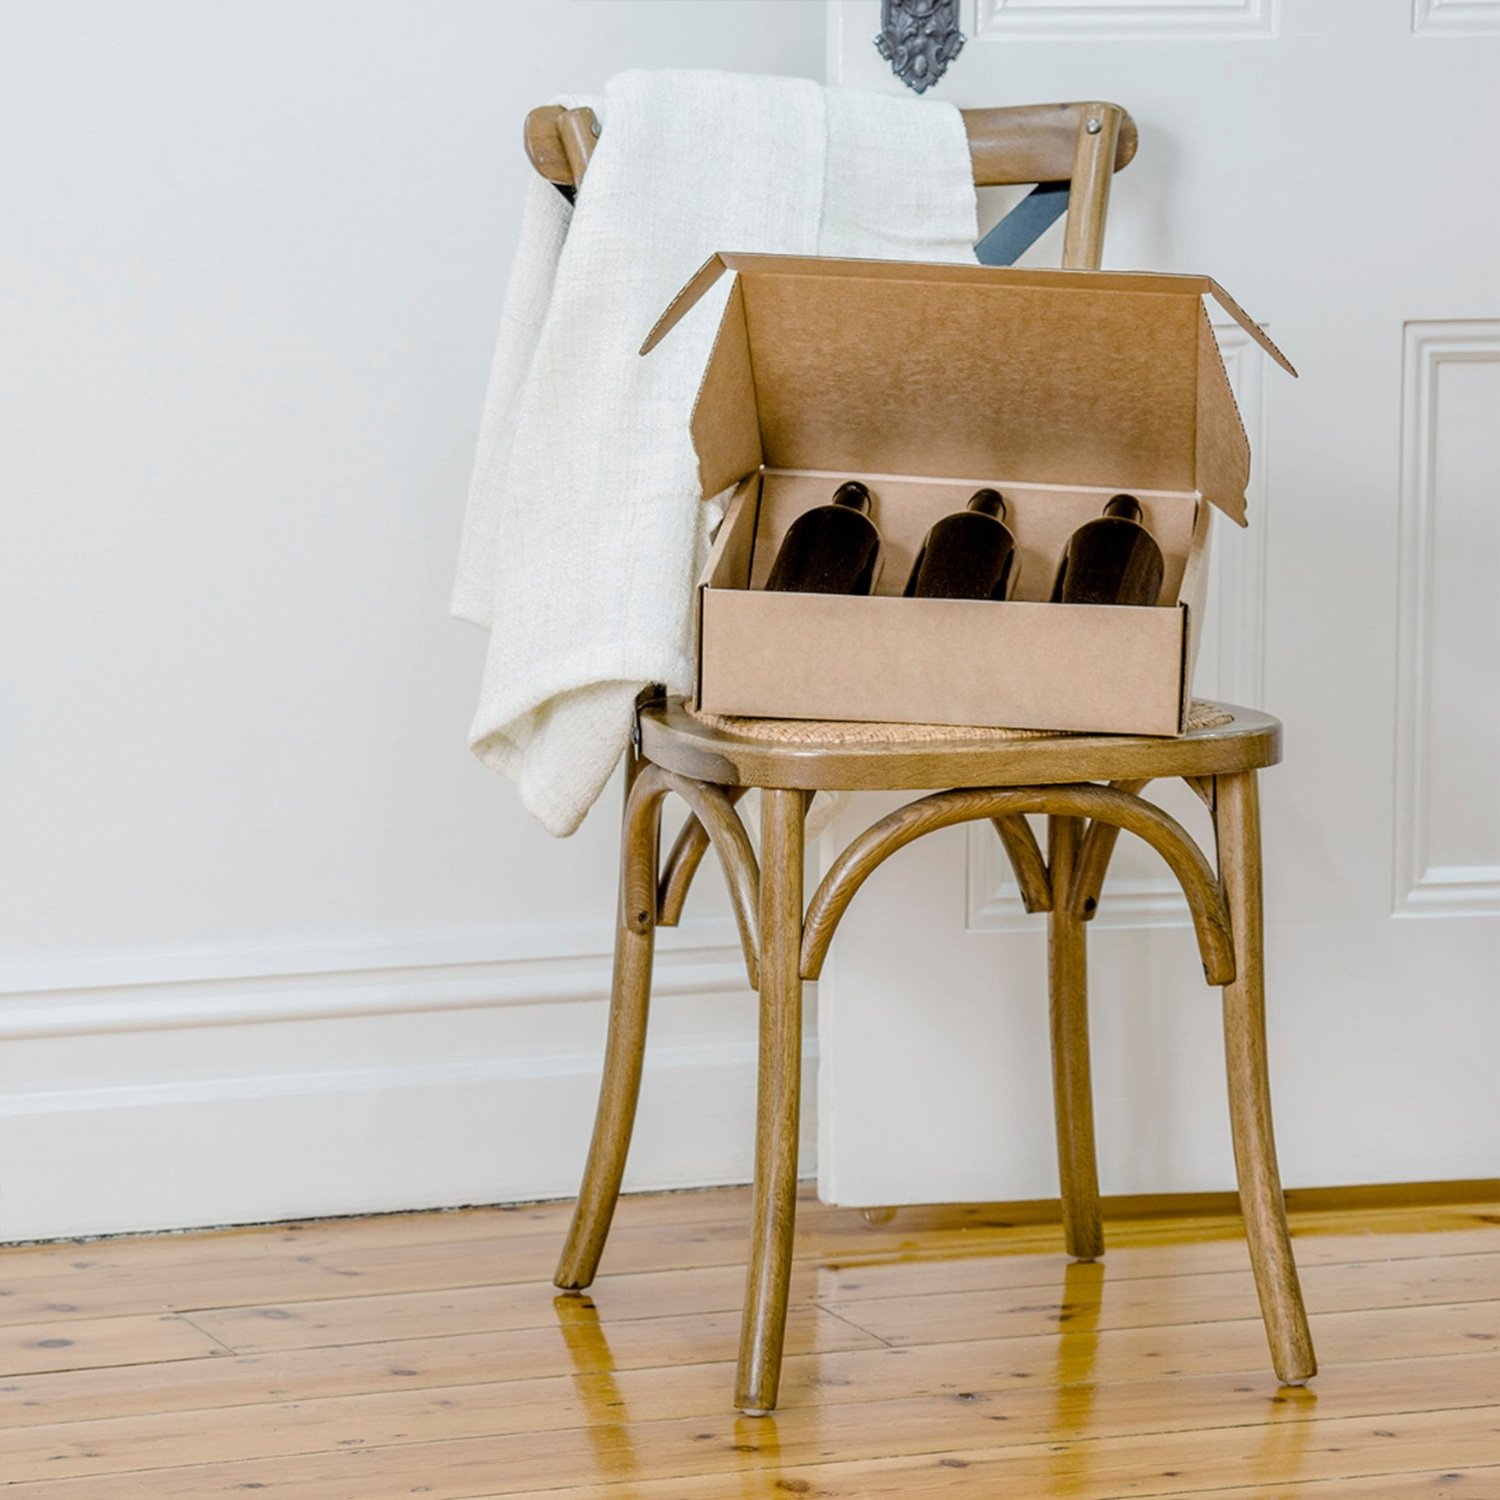 Image of wine bottles, packaged, sitting on a wooden chair